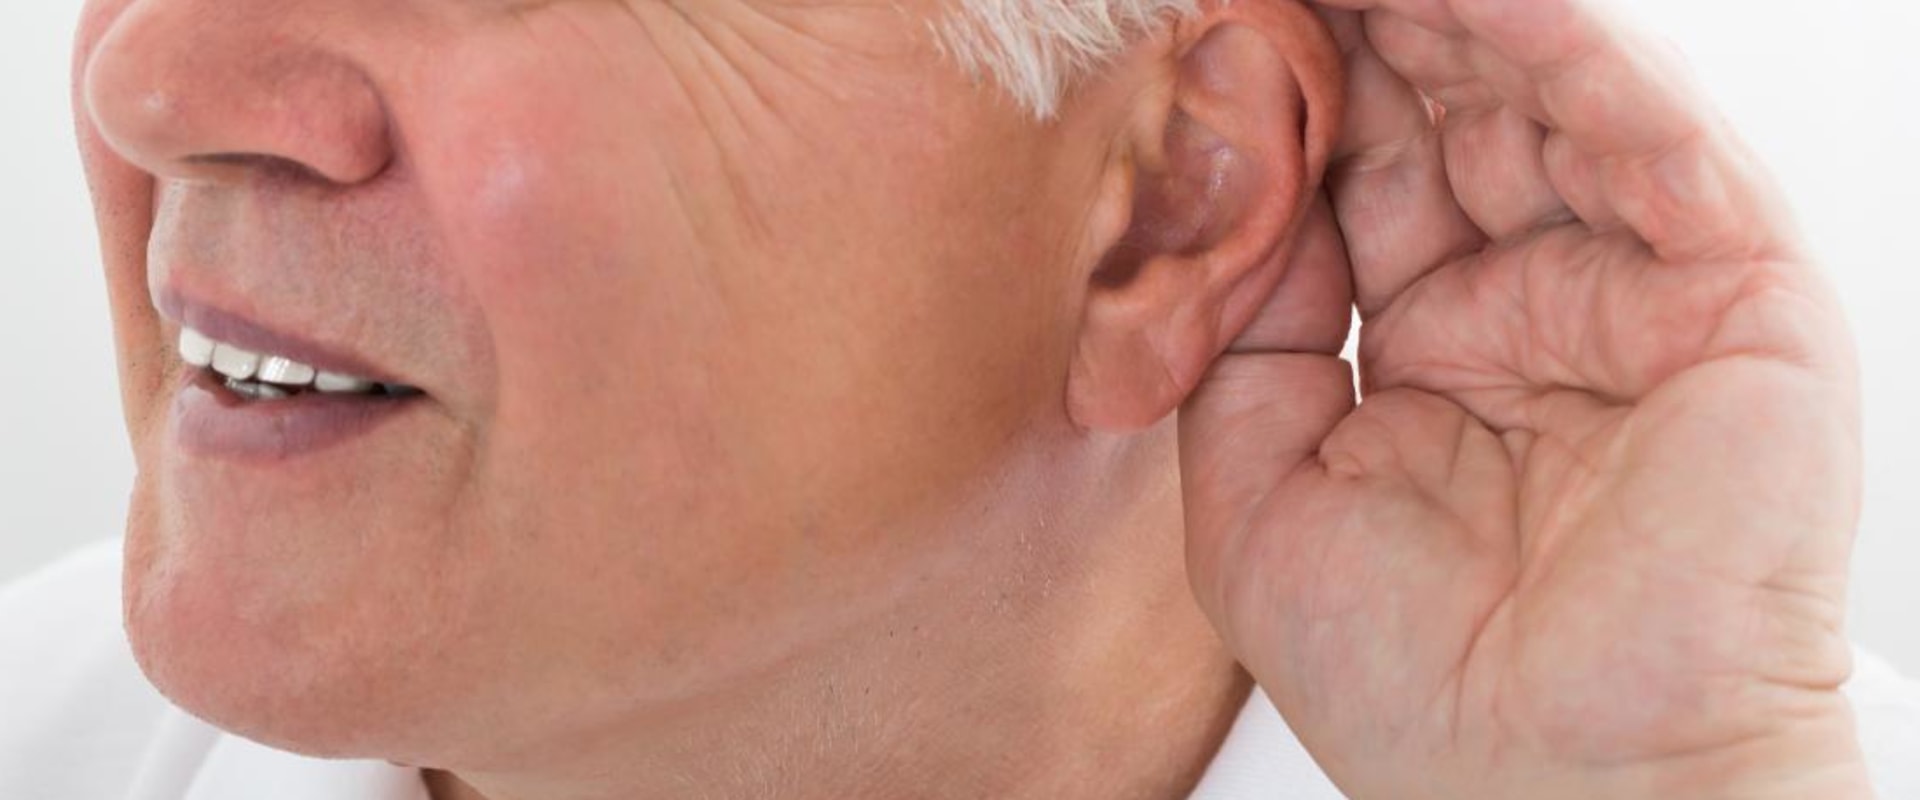 Why are men more at risk for hearing loss?